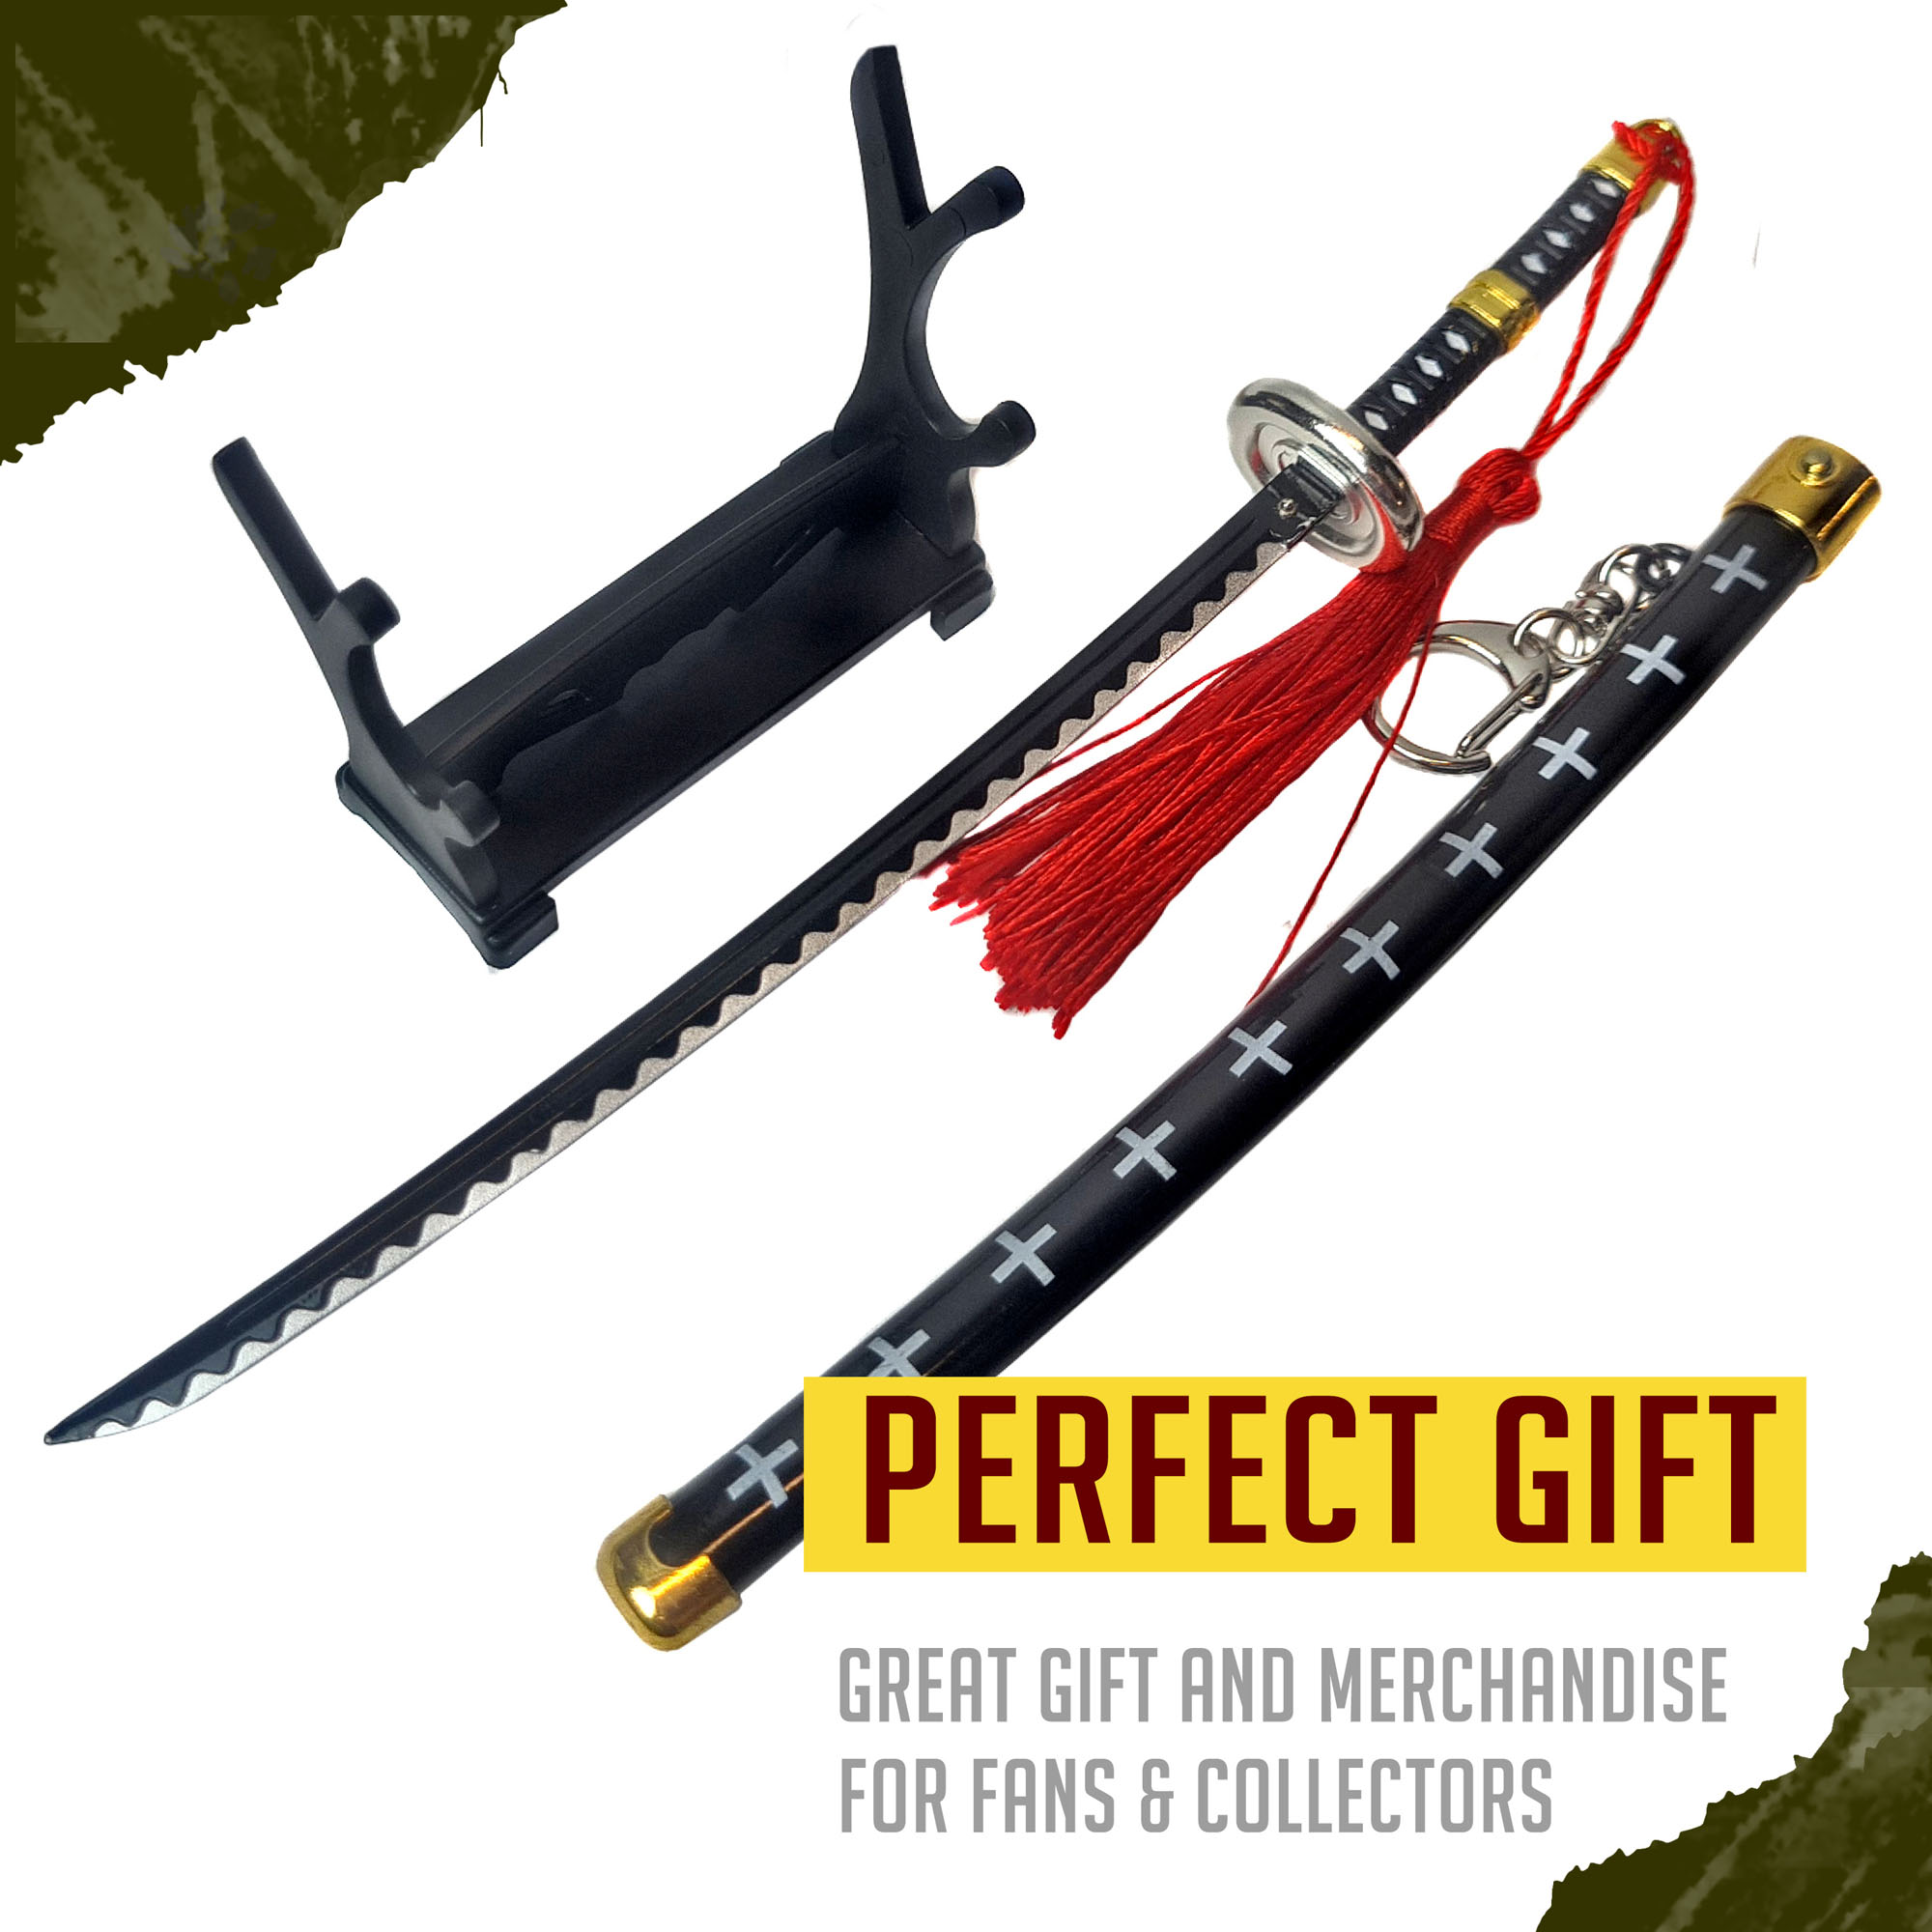 One Piece Sword – Trafalgar Law Sword Katana Letter Opener with Sheath and Stand